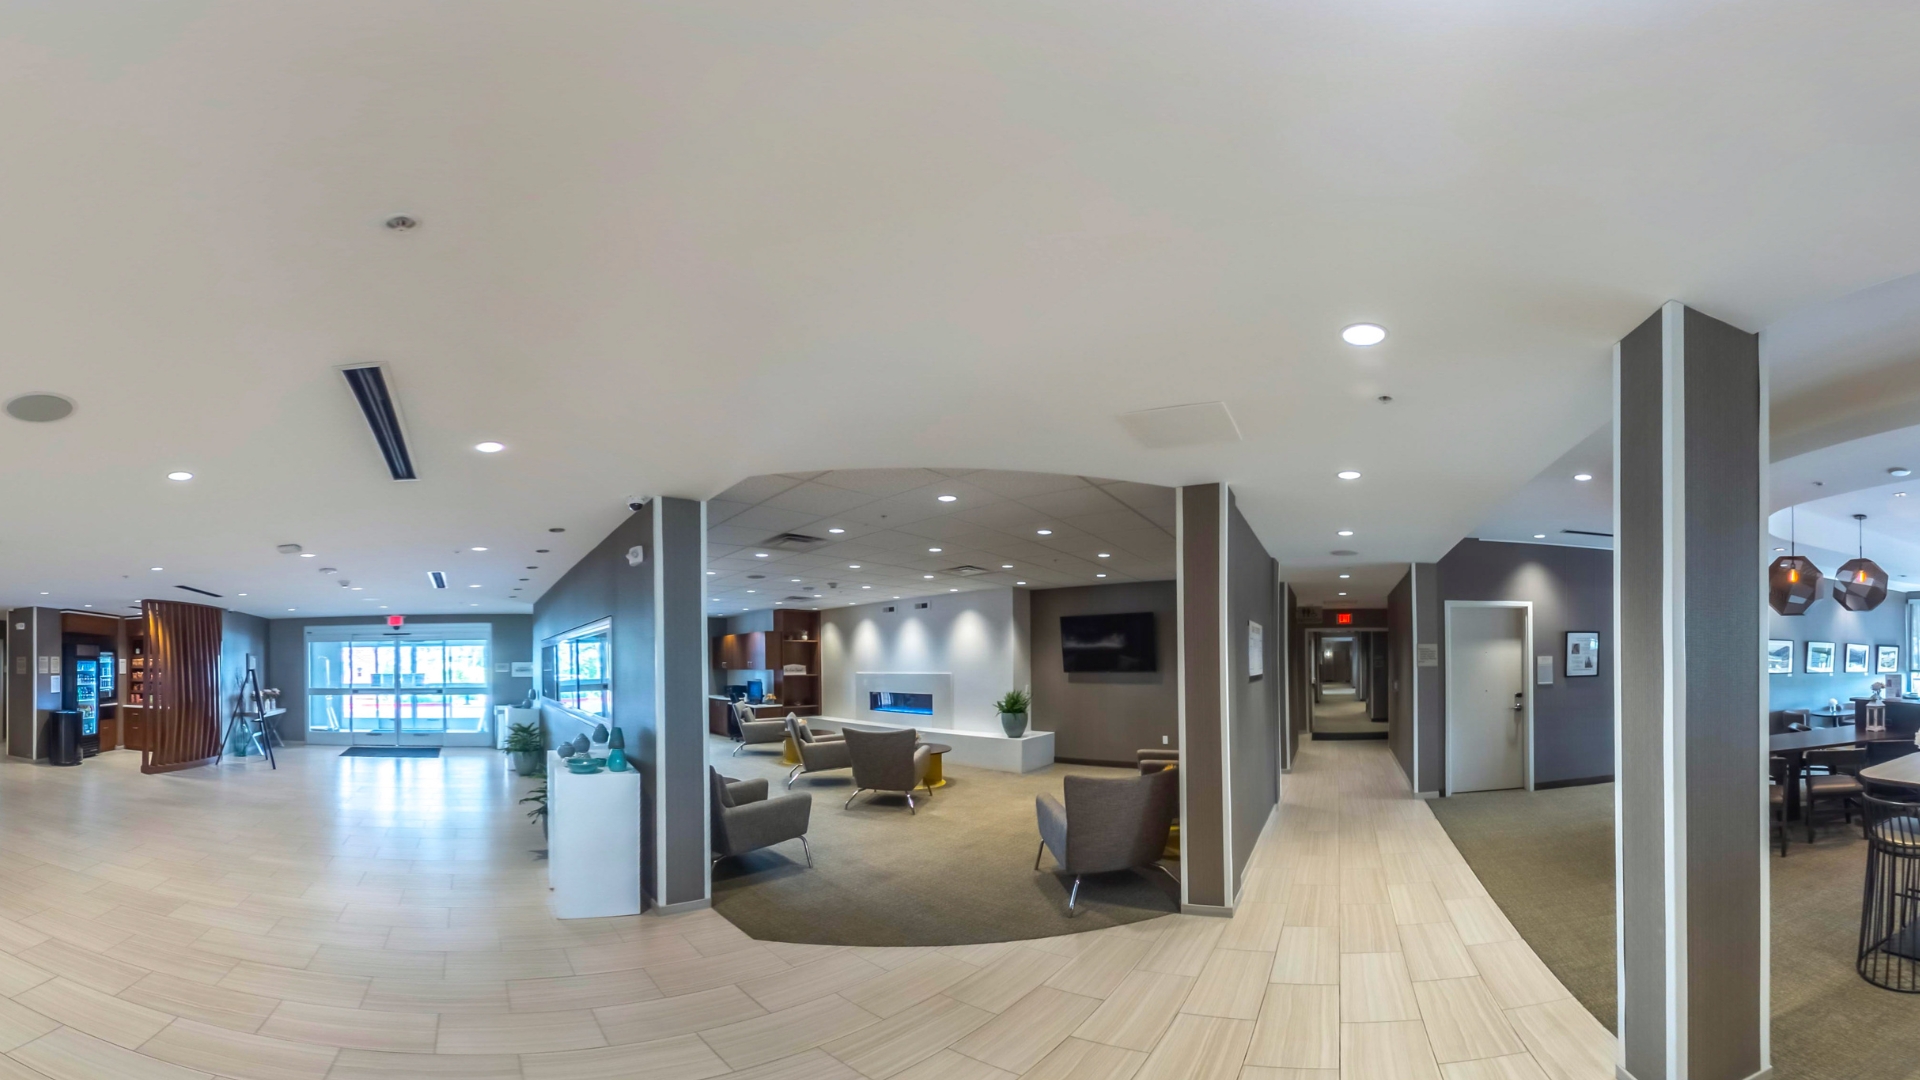 Panoramic View of Lobby and Hallway Area at Springhill Suites - Auburn